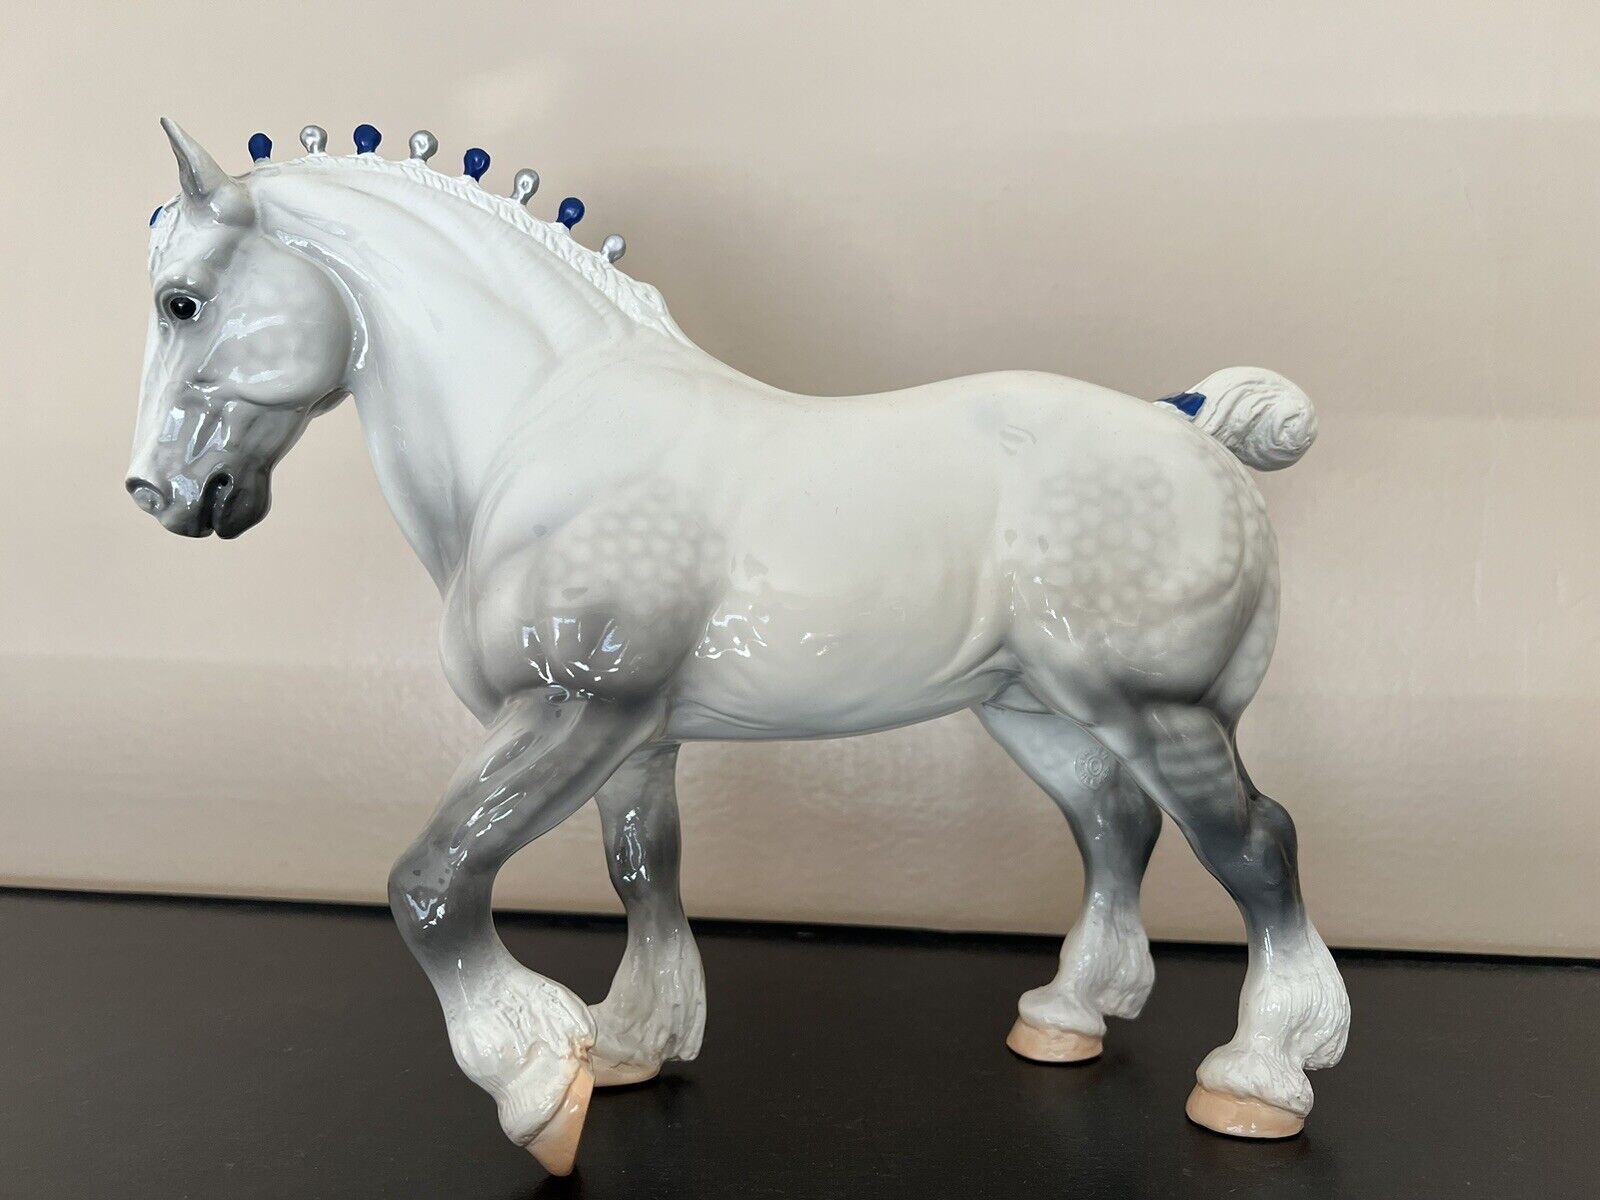 Breyer Horse Web Special Glossy Clydesdale Stallion ‘Magnus’ 2012 Rare